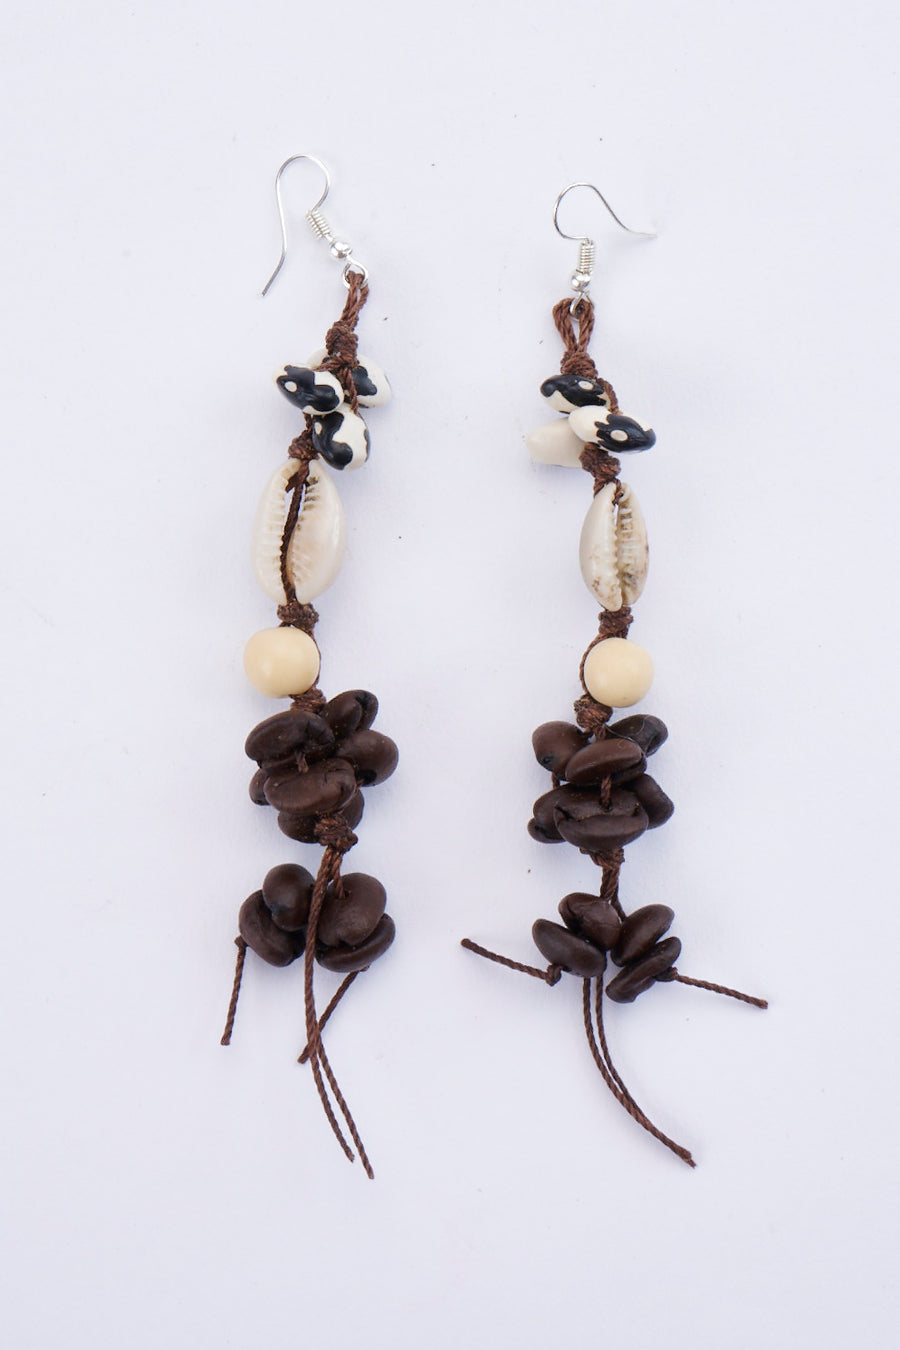 Mexican Coffee Bean Earrings with Shells